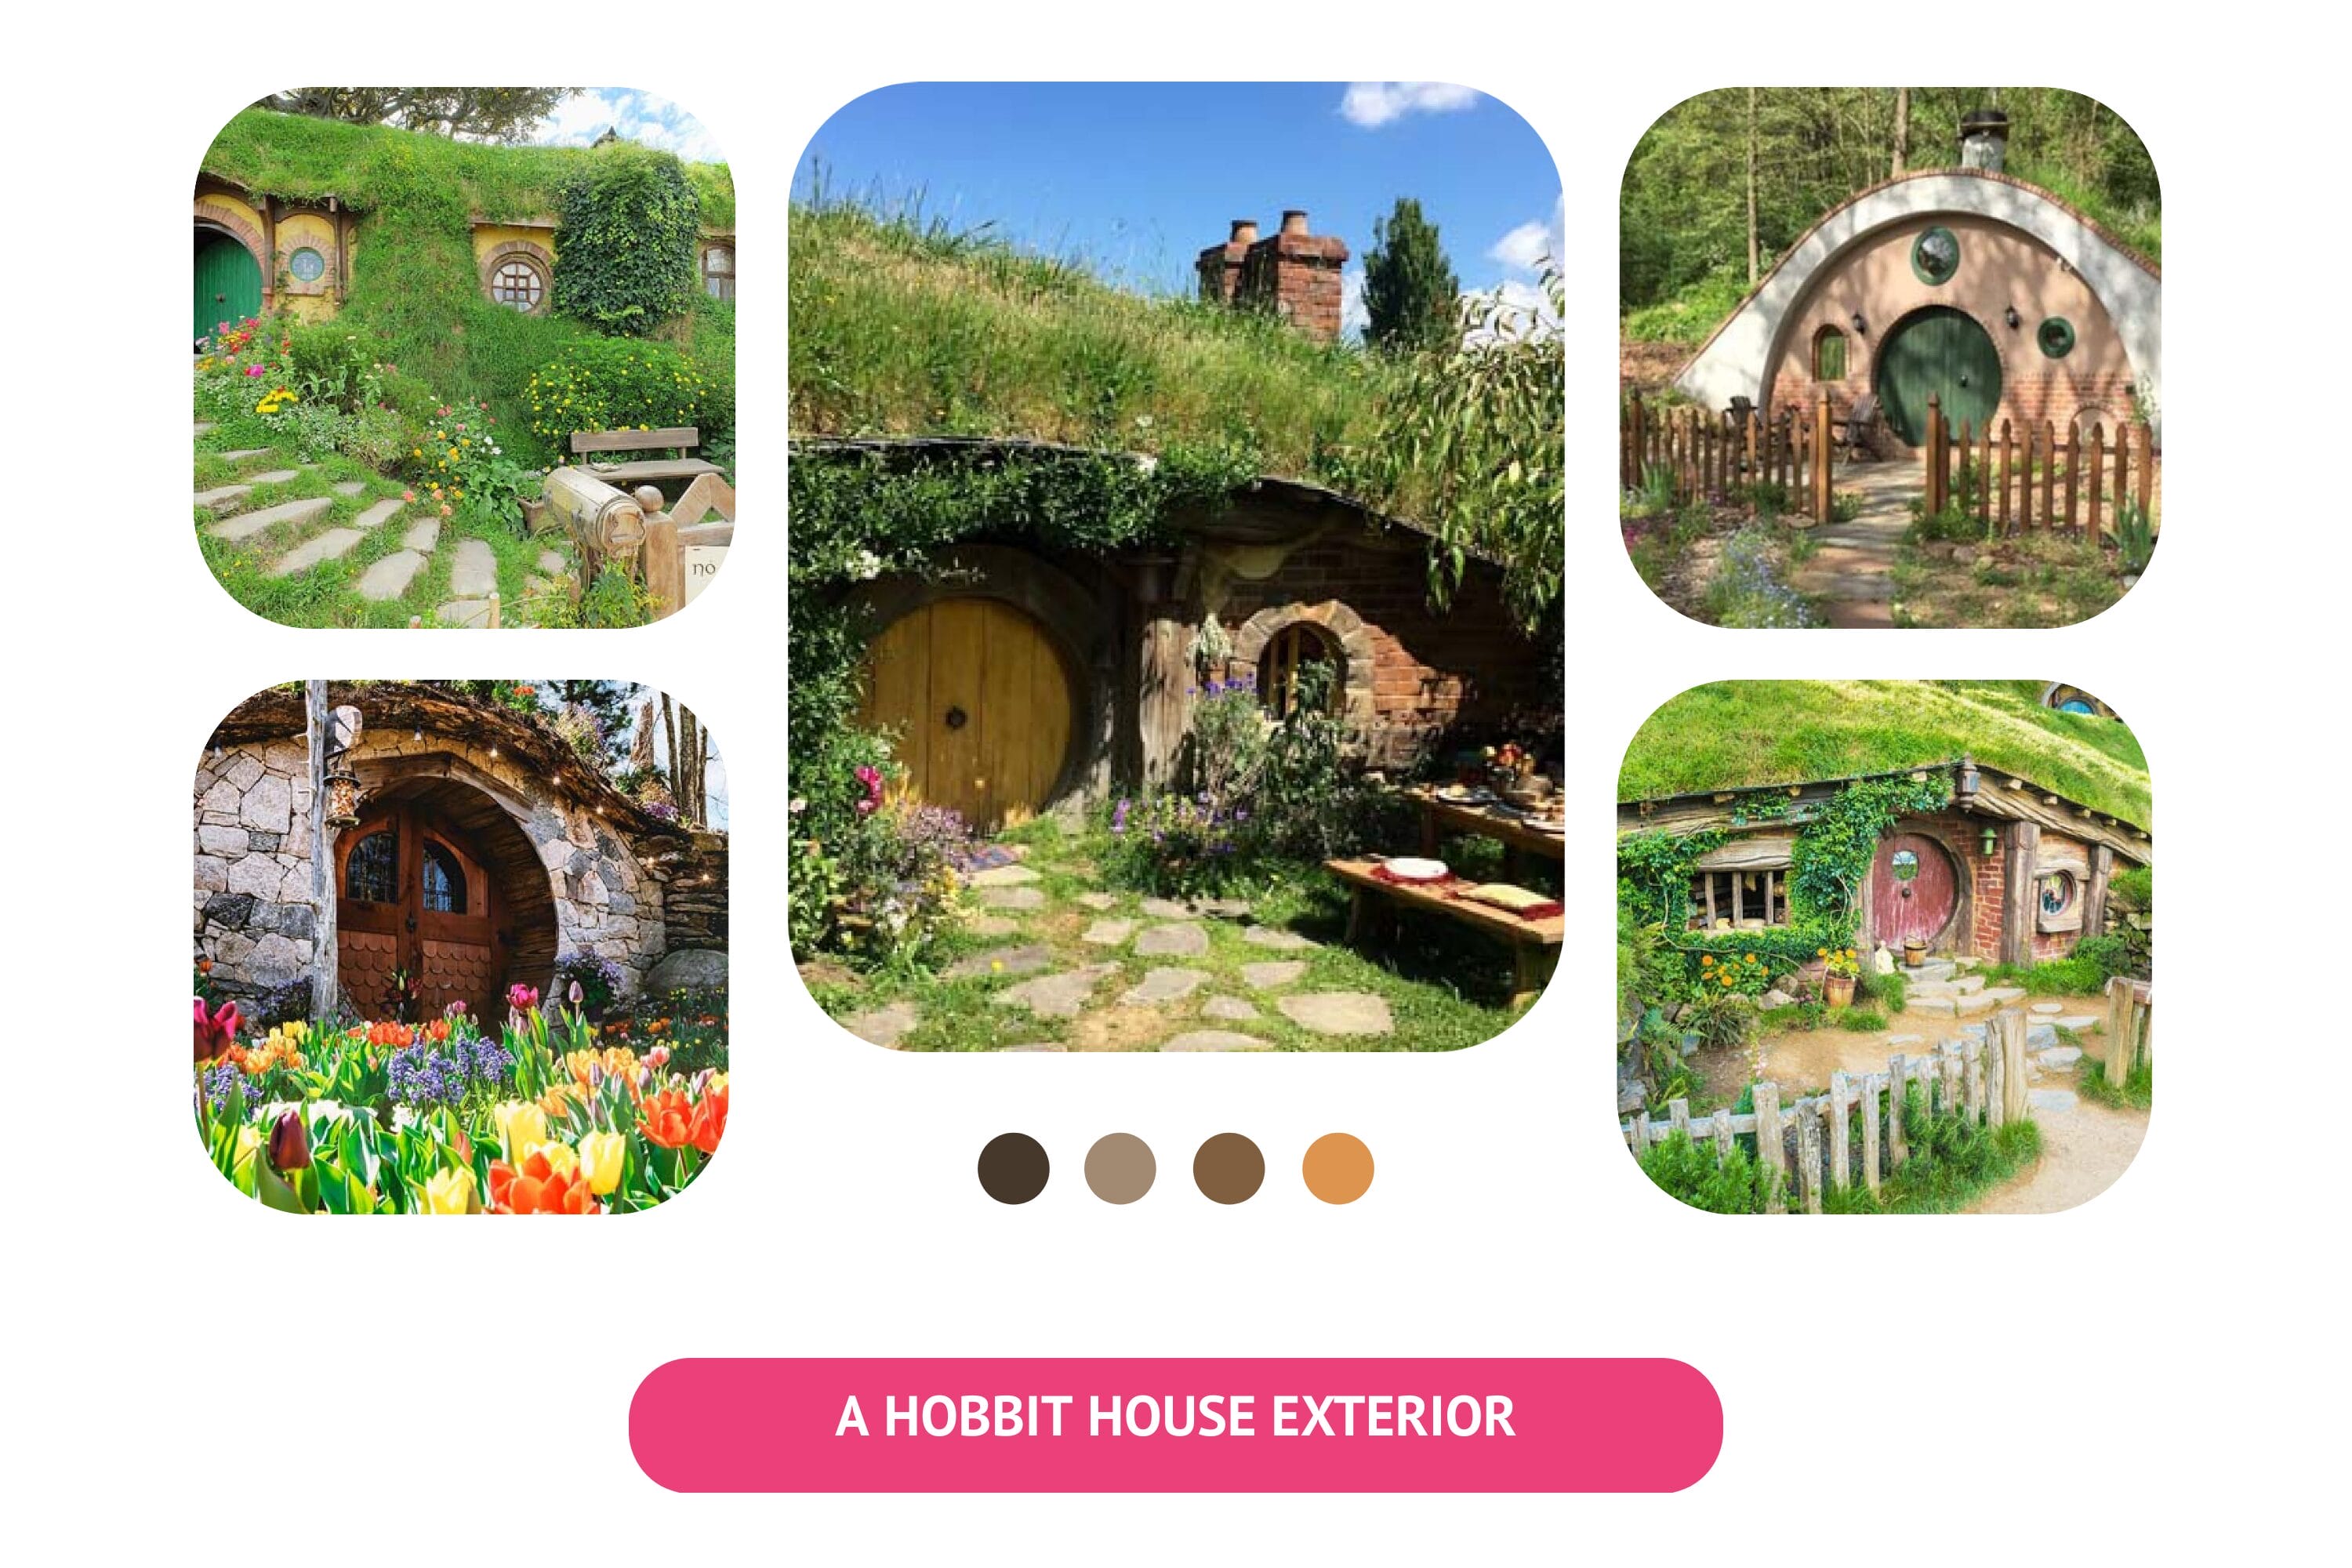 A modern take on the classic hobbit house design.